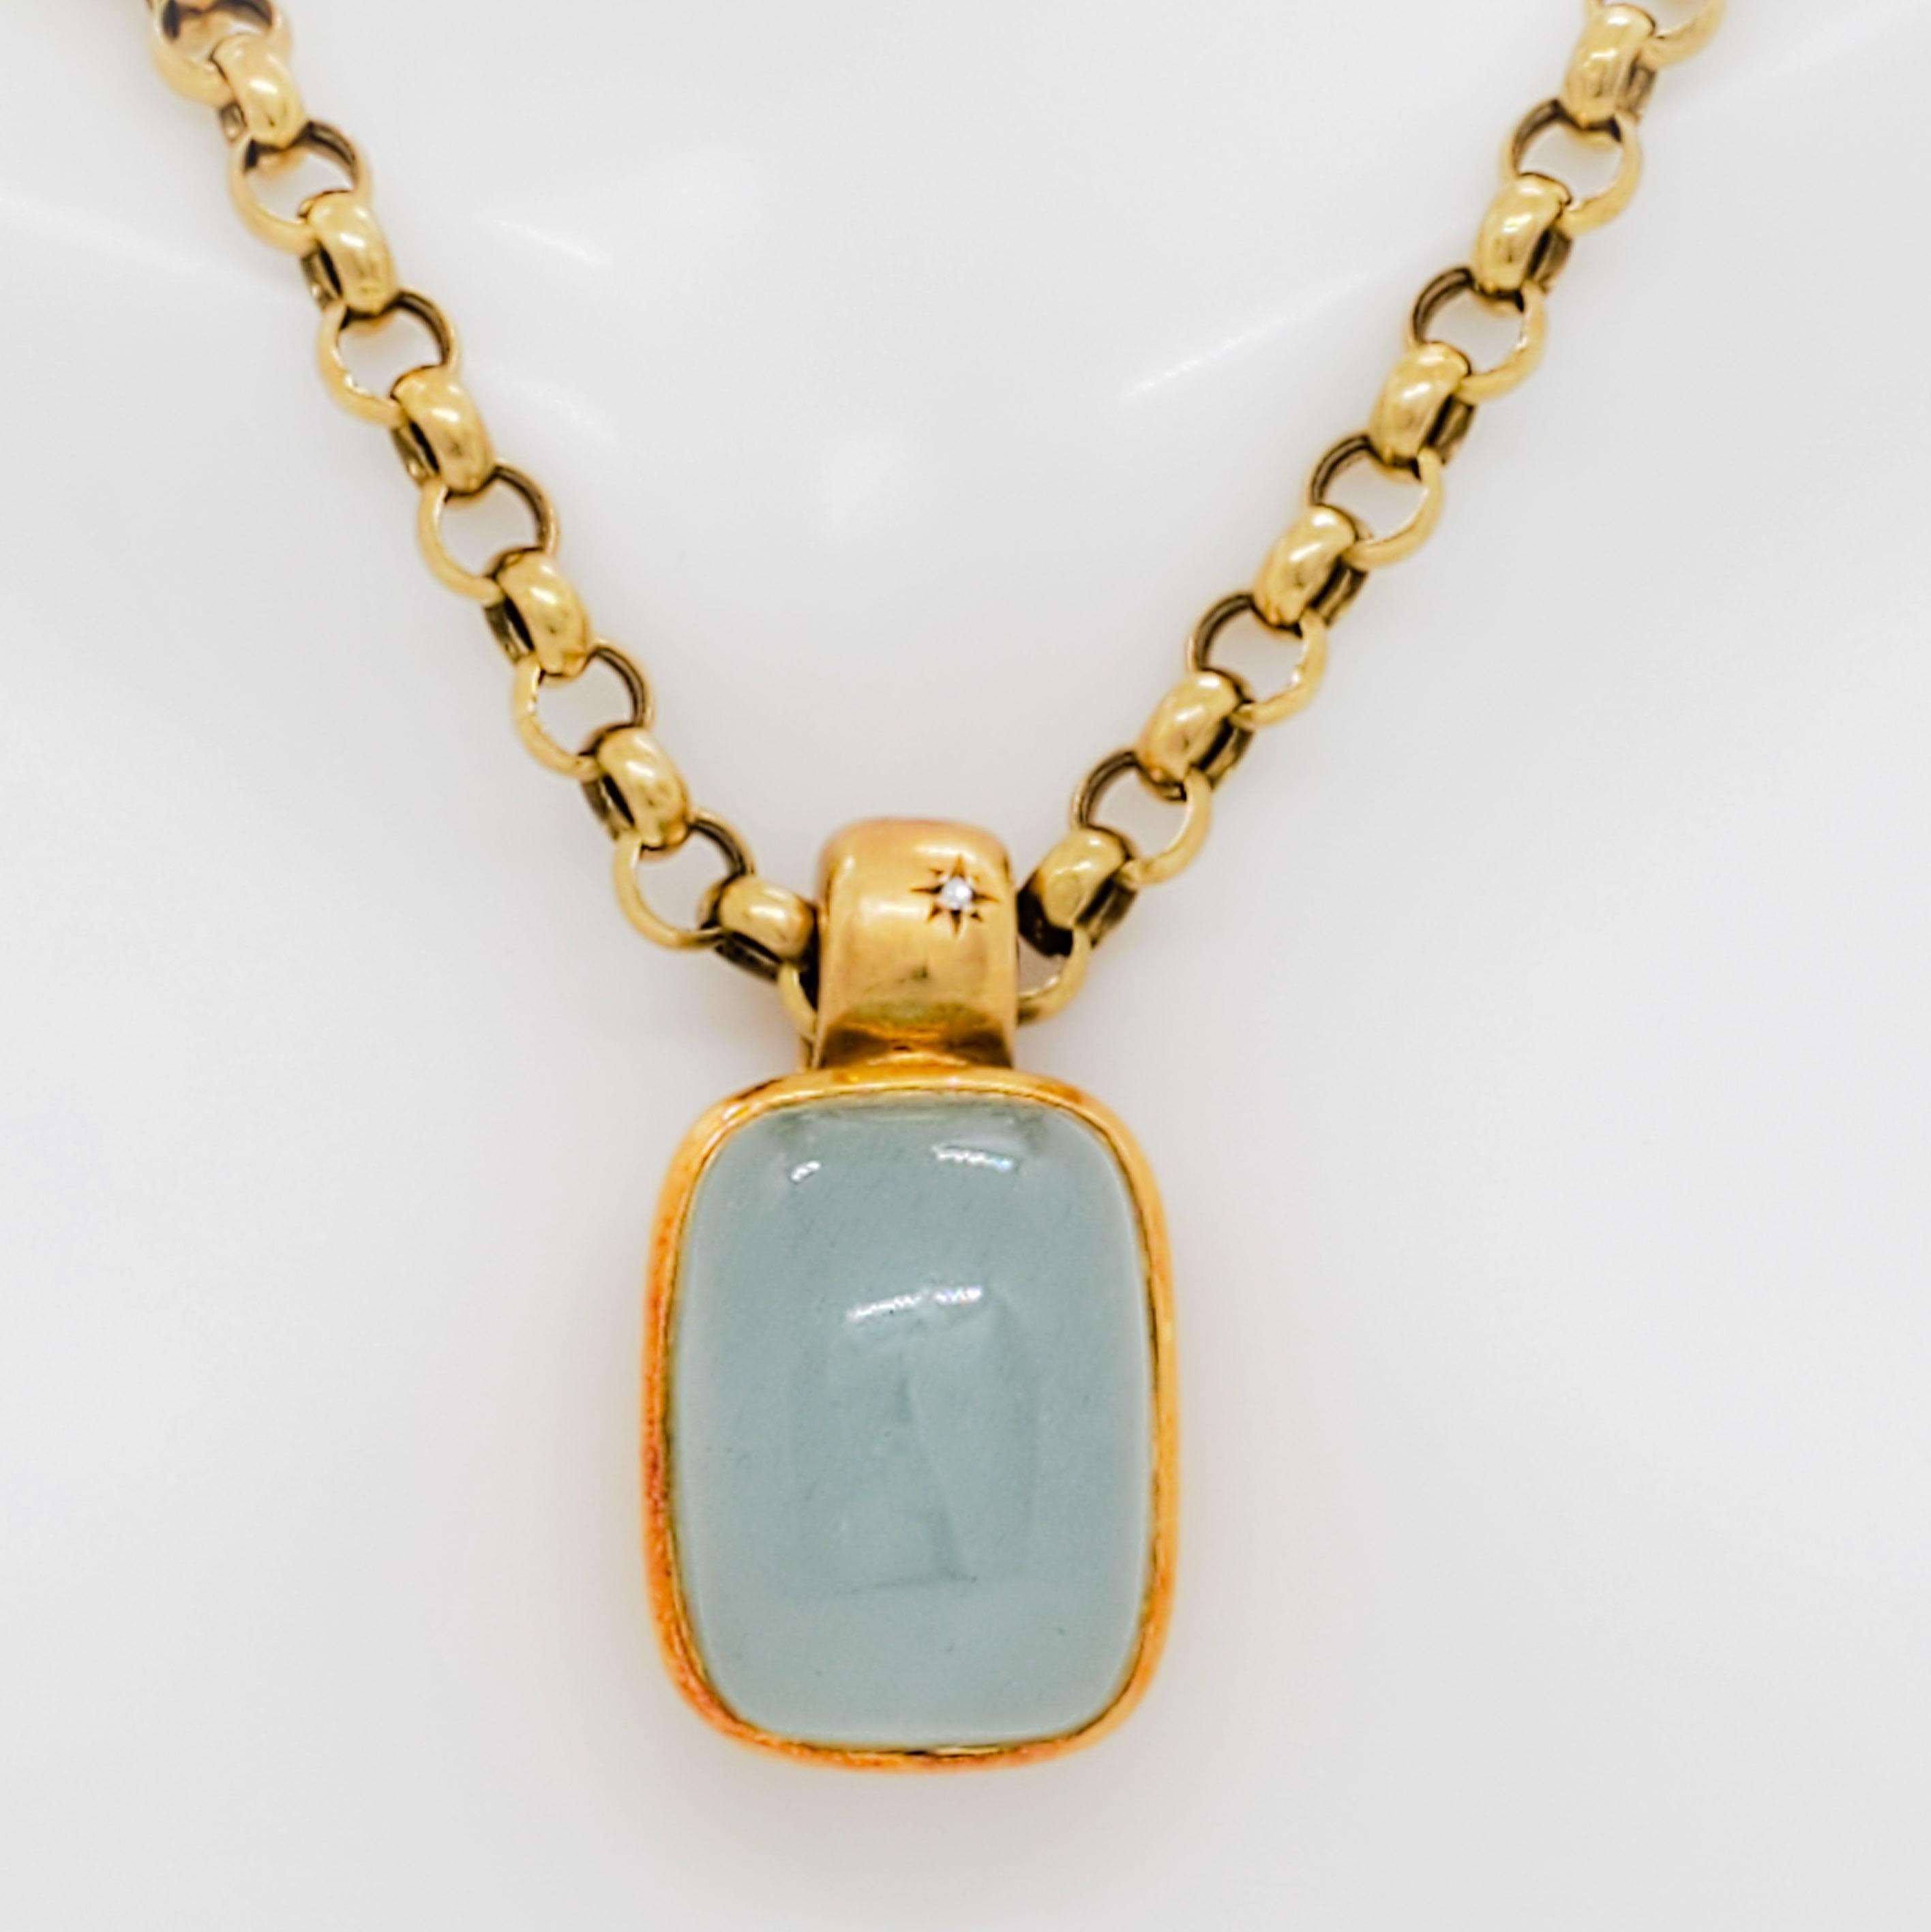 Beautiful H. Stern pendant necklace made with light green stone and signature single diamond star. Handmade in 18k yellow gold.